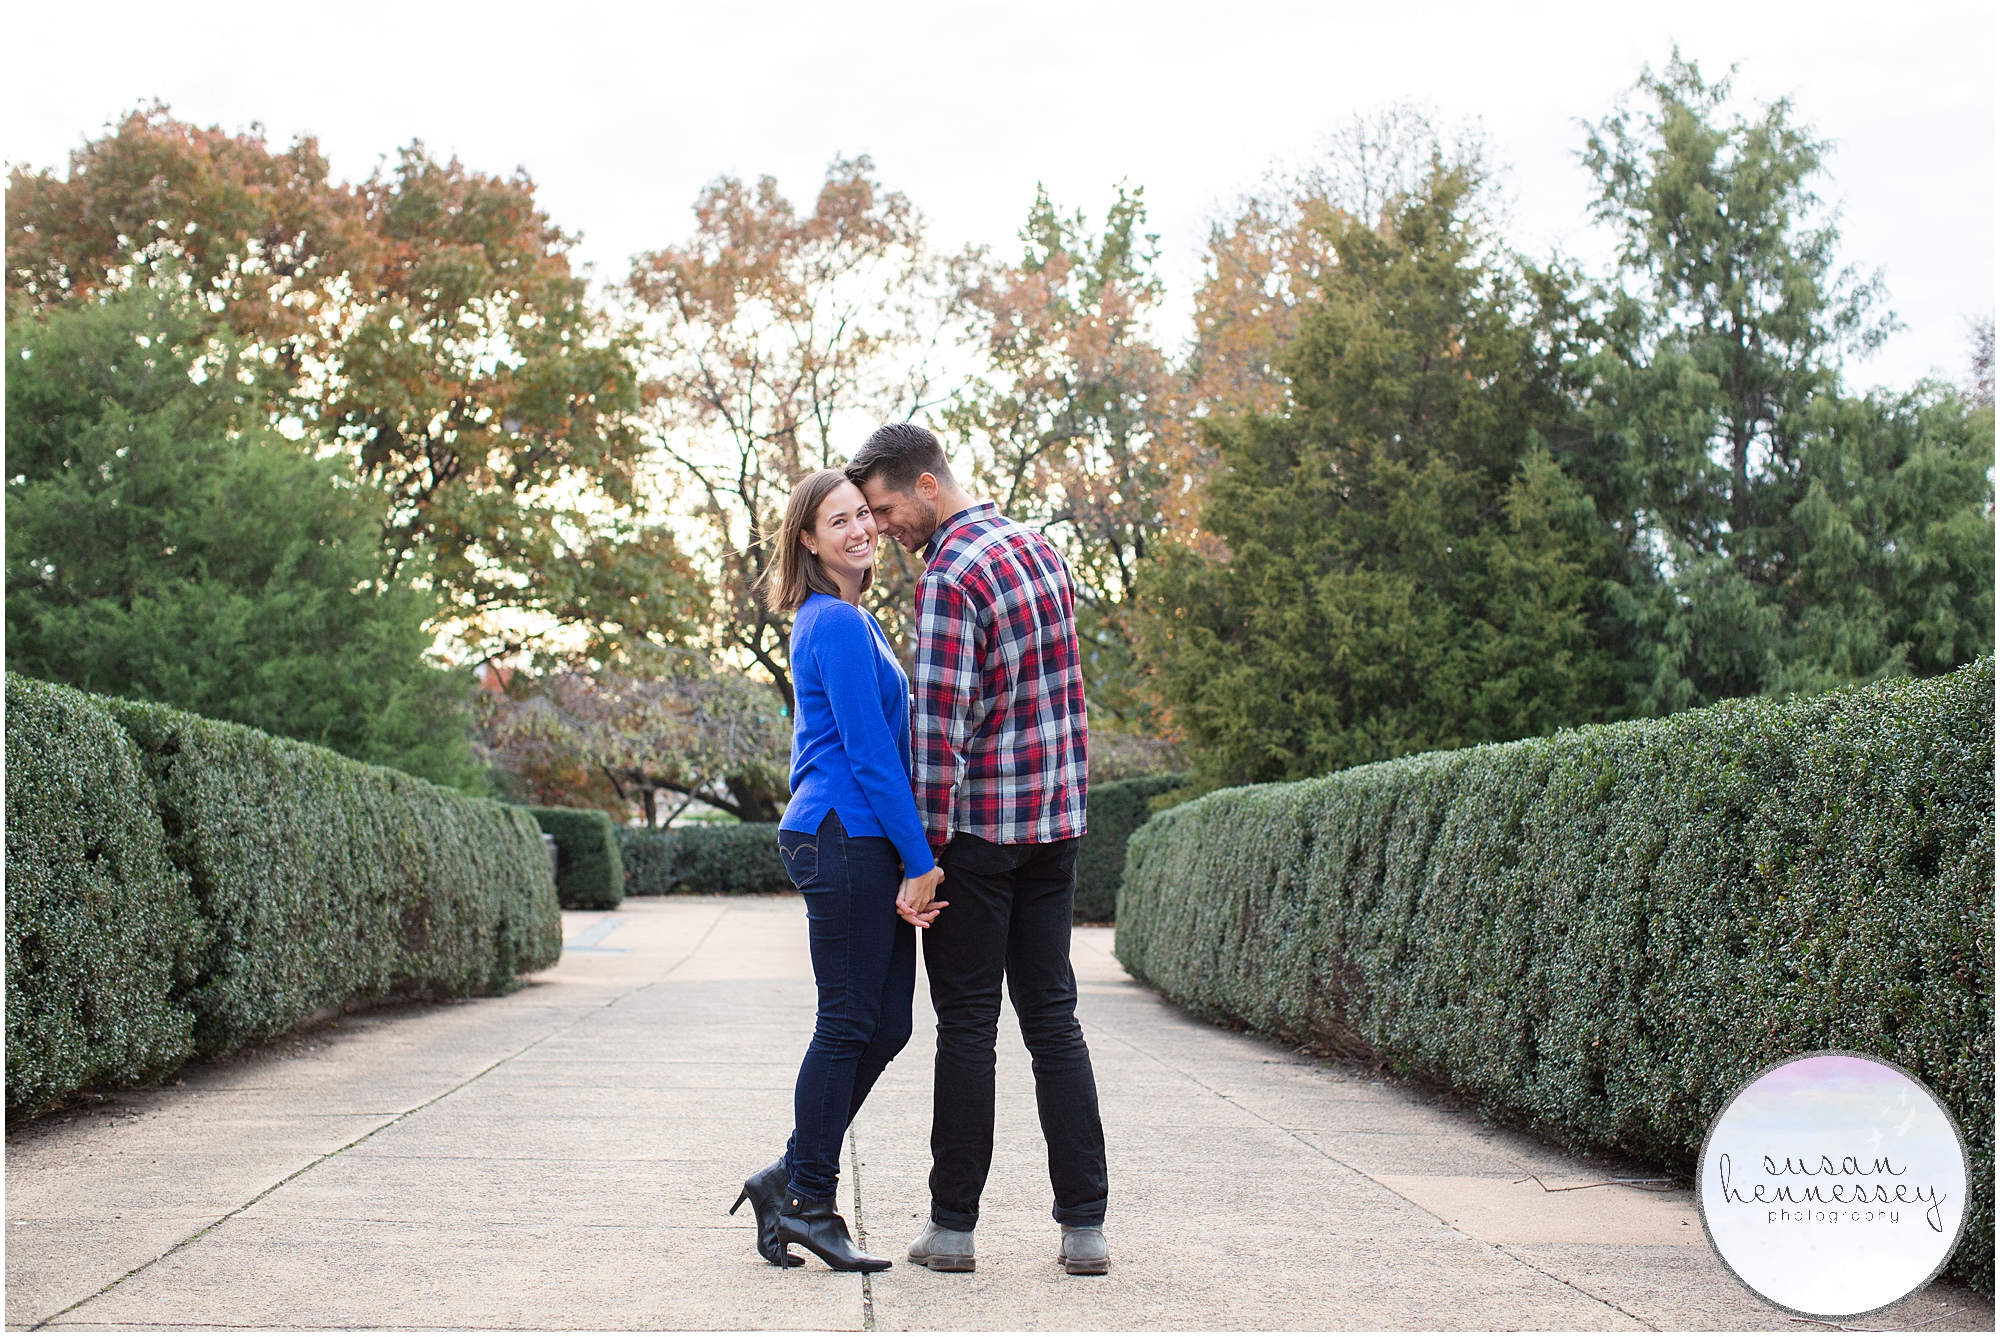 A winter engagement session at the Art Museum in Philadelphia